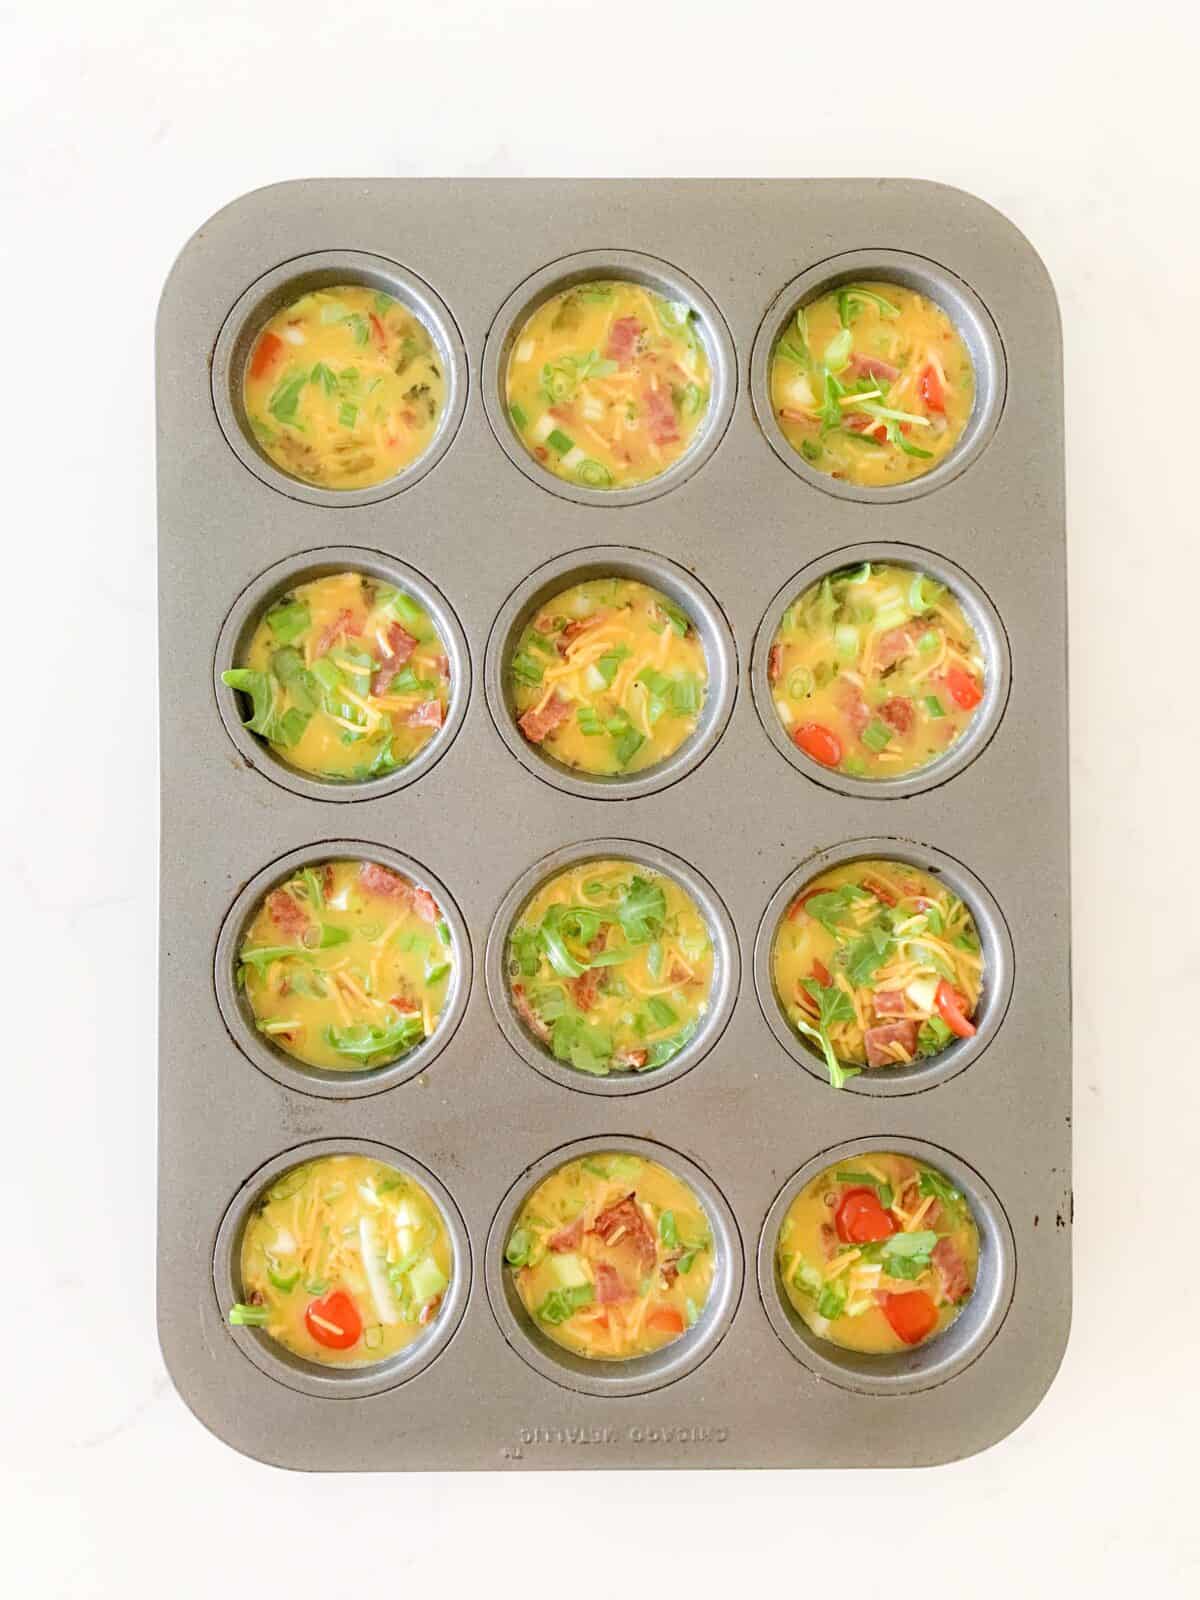 egg bites mixture in muffin tins before baking